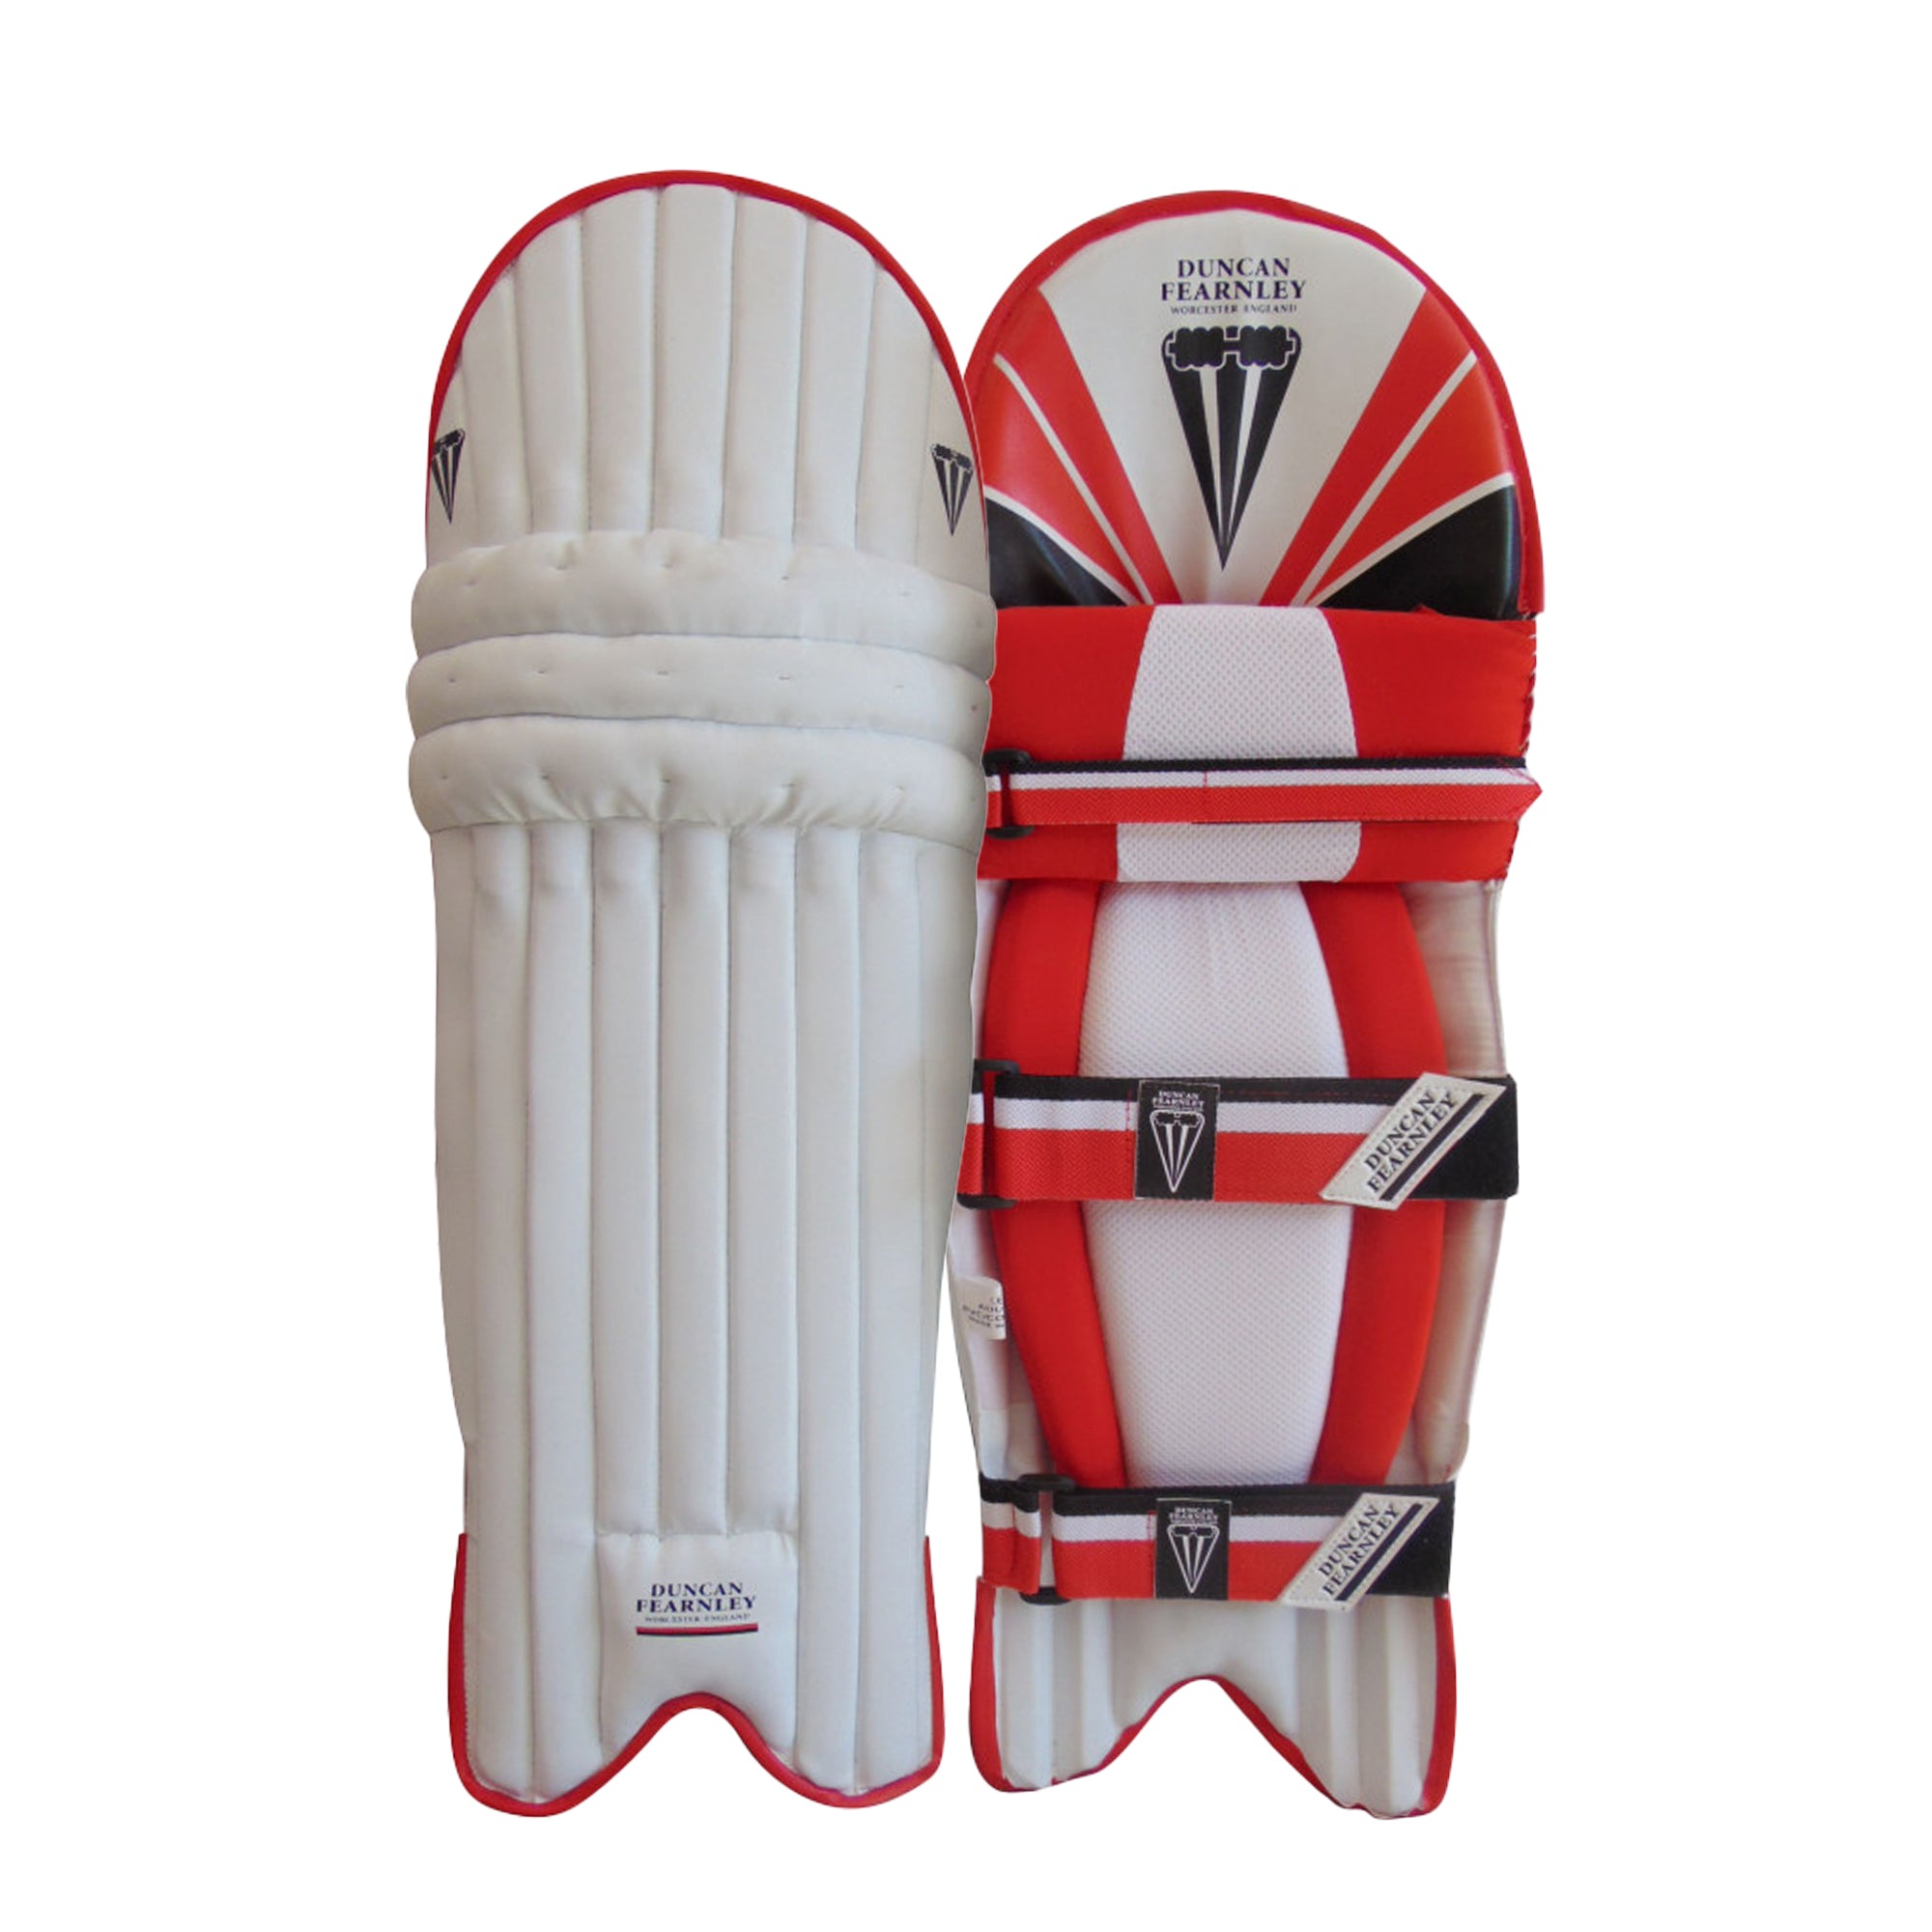 Buy Duncan Fearnley Attack Classic Cricket leg Guards from Stagsports Store